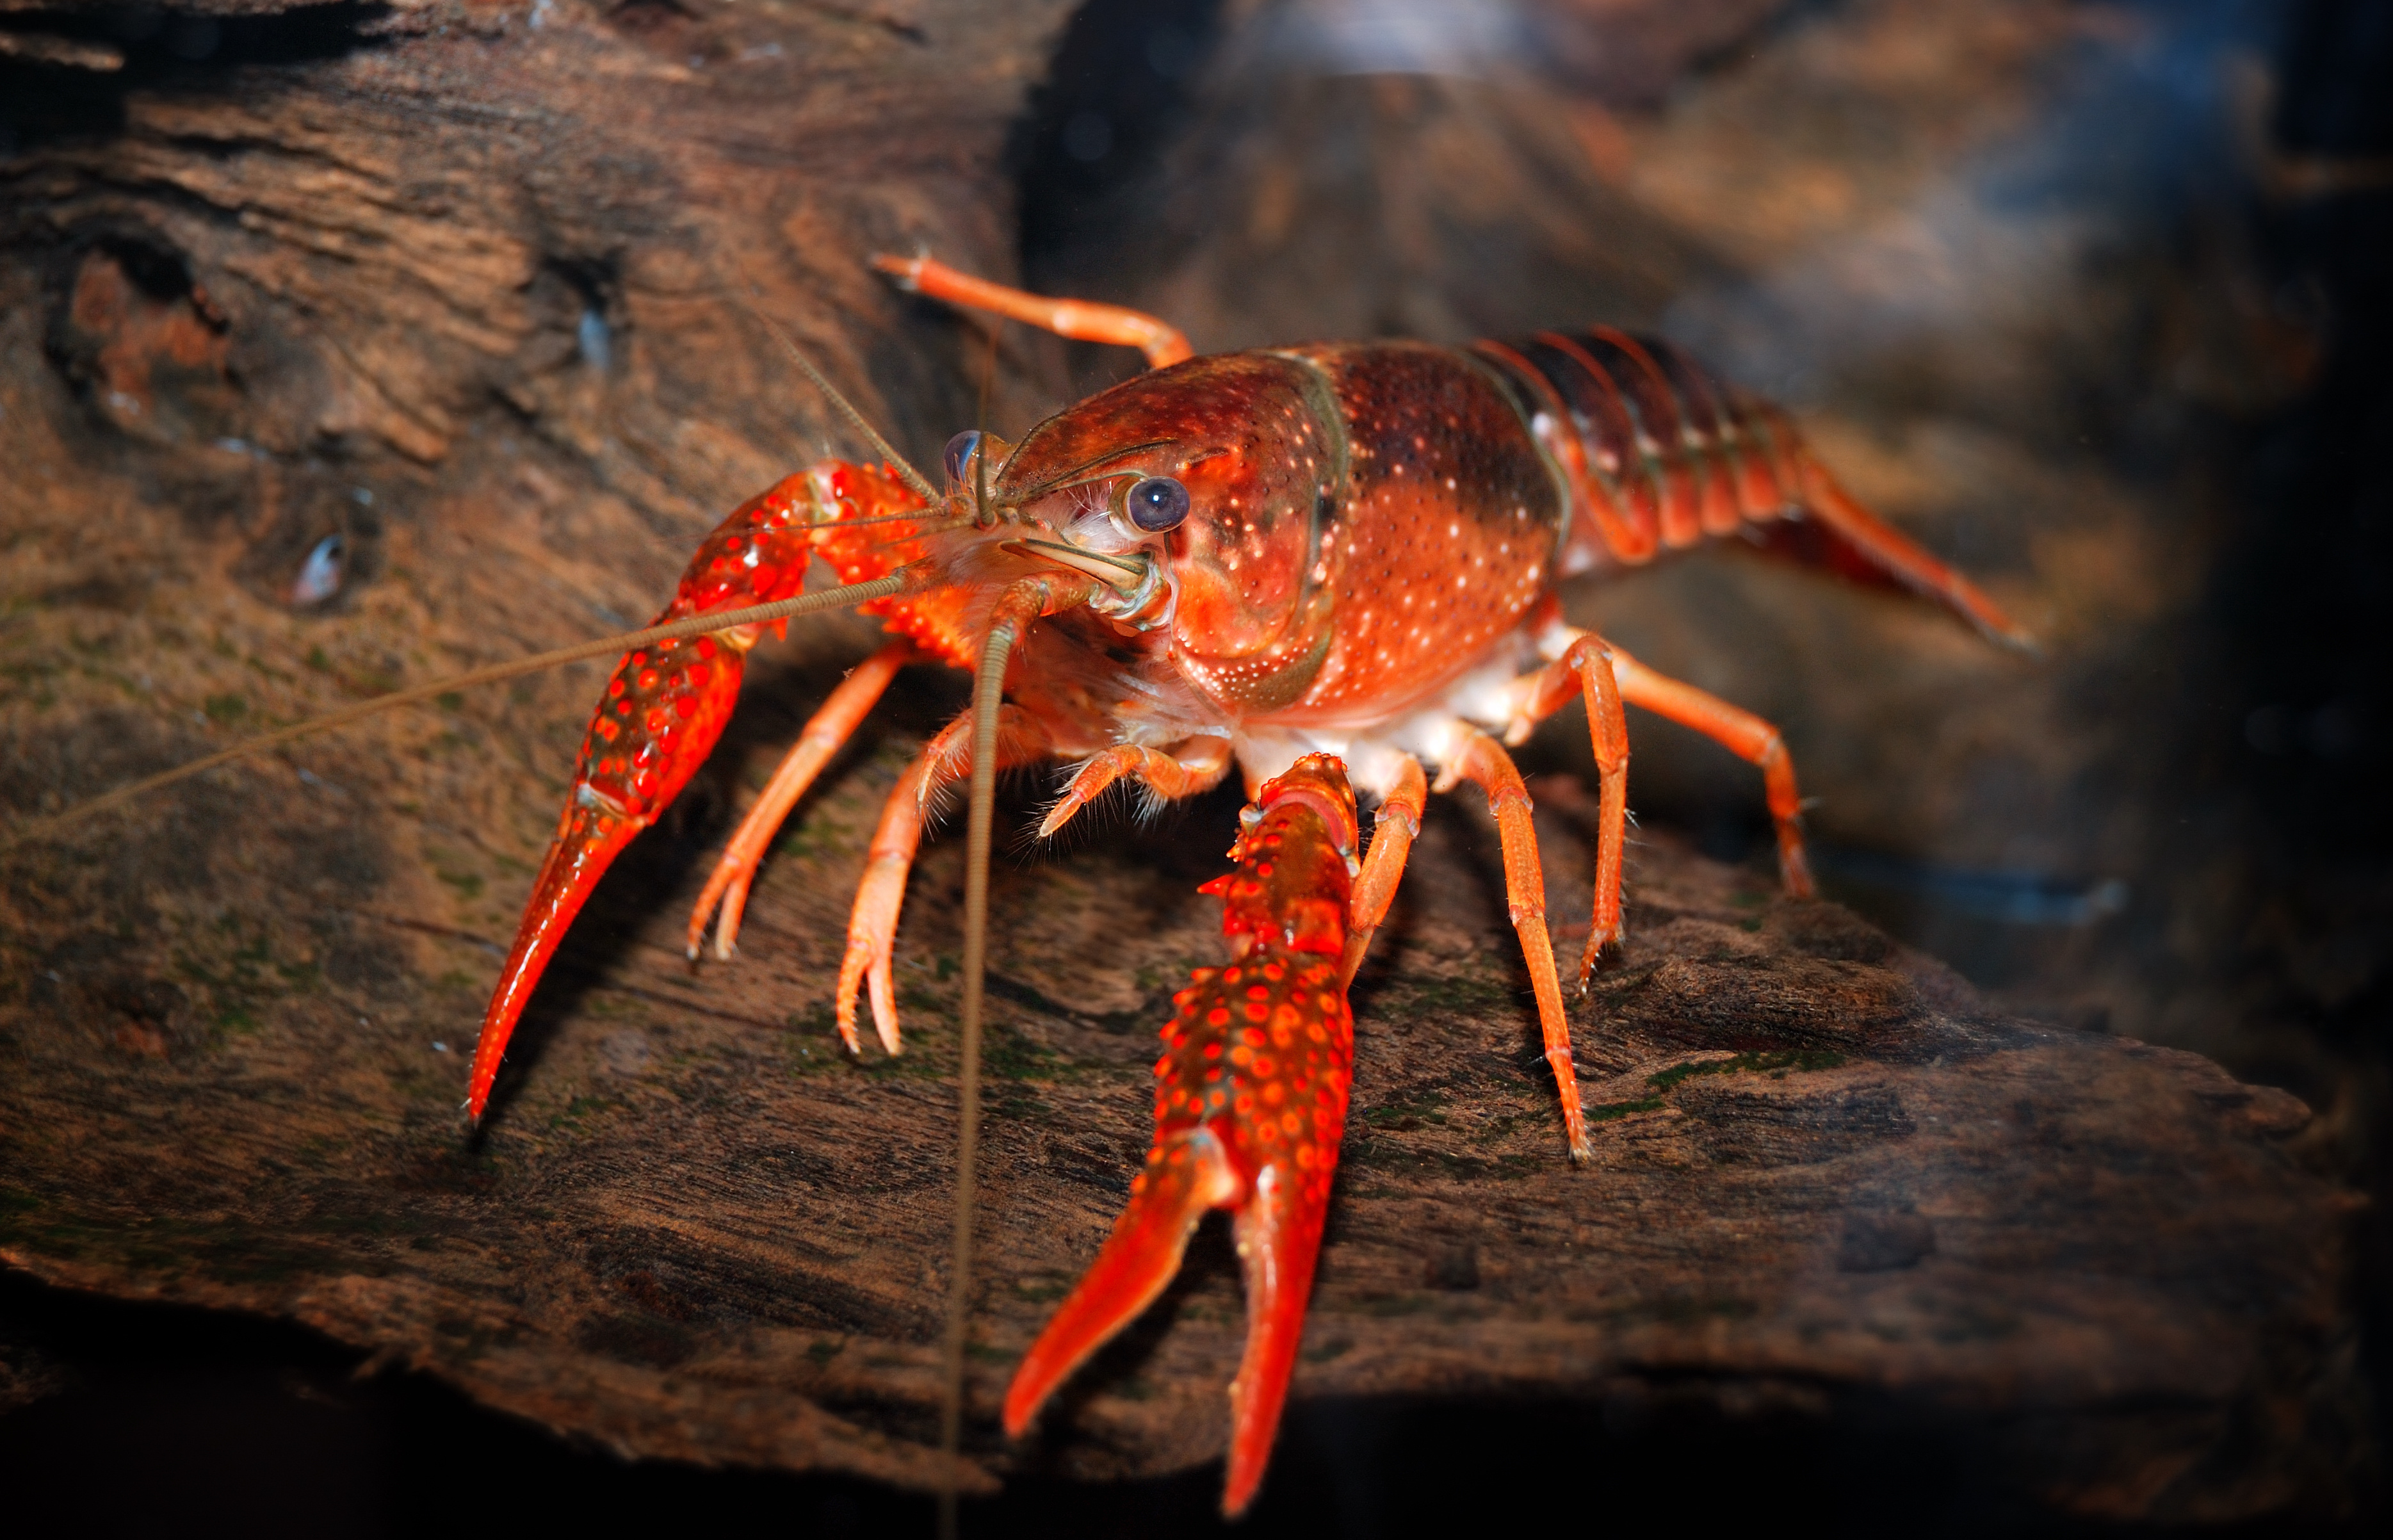 A picture of a crayfish on a piece of wood